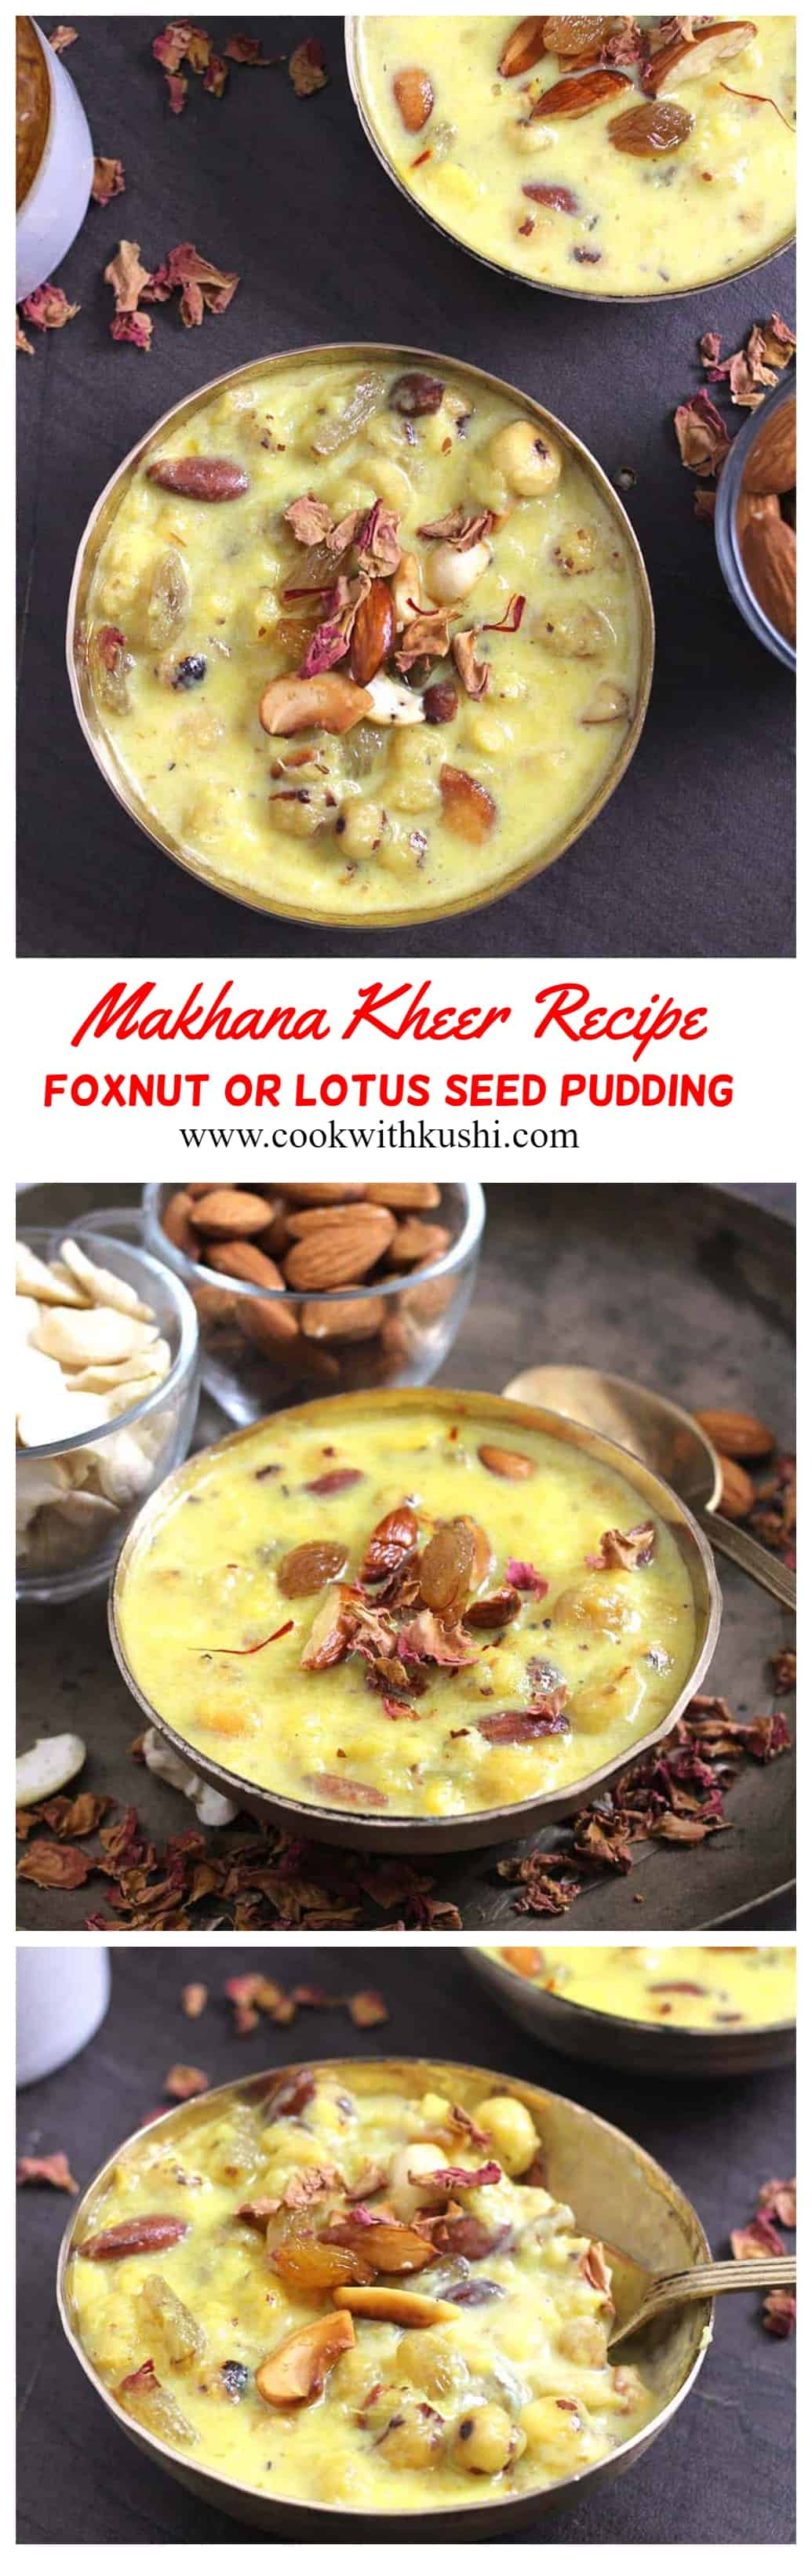 Phool Makhana Kheer or Makhane Ki Kheer is a rich and creamy popular Indian pudding dessert prepared using foxnut (makhana), milk, ghee, nuts, and flavored with saffron (kesar) and/or cardamom powder. A perfect dessert for the royals. #indianpudding #Kheer #dessert #sweets